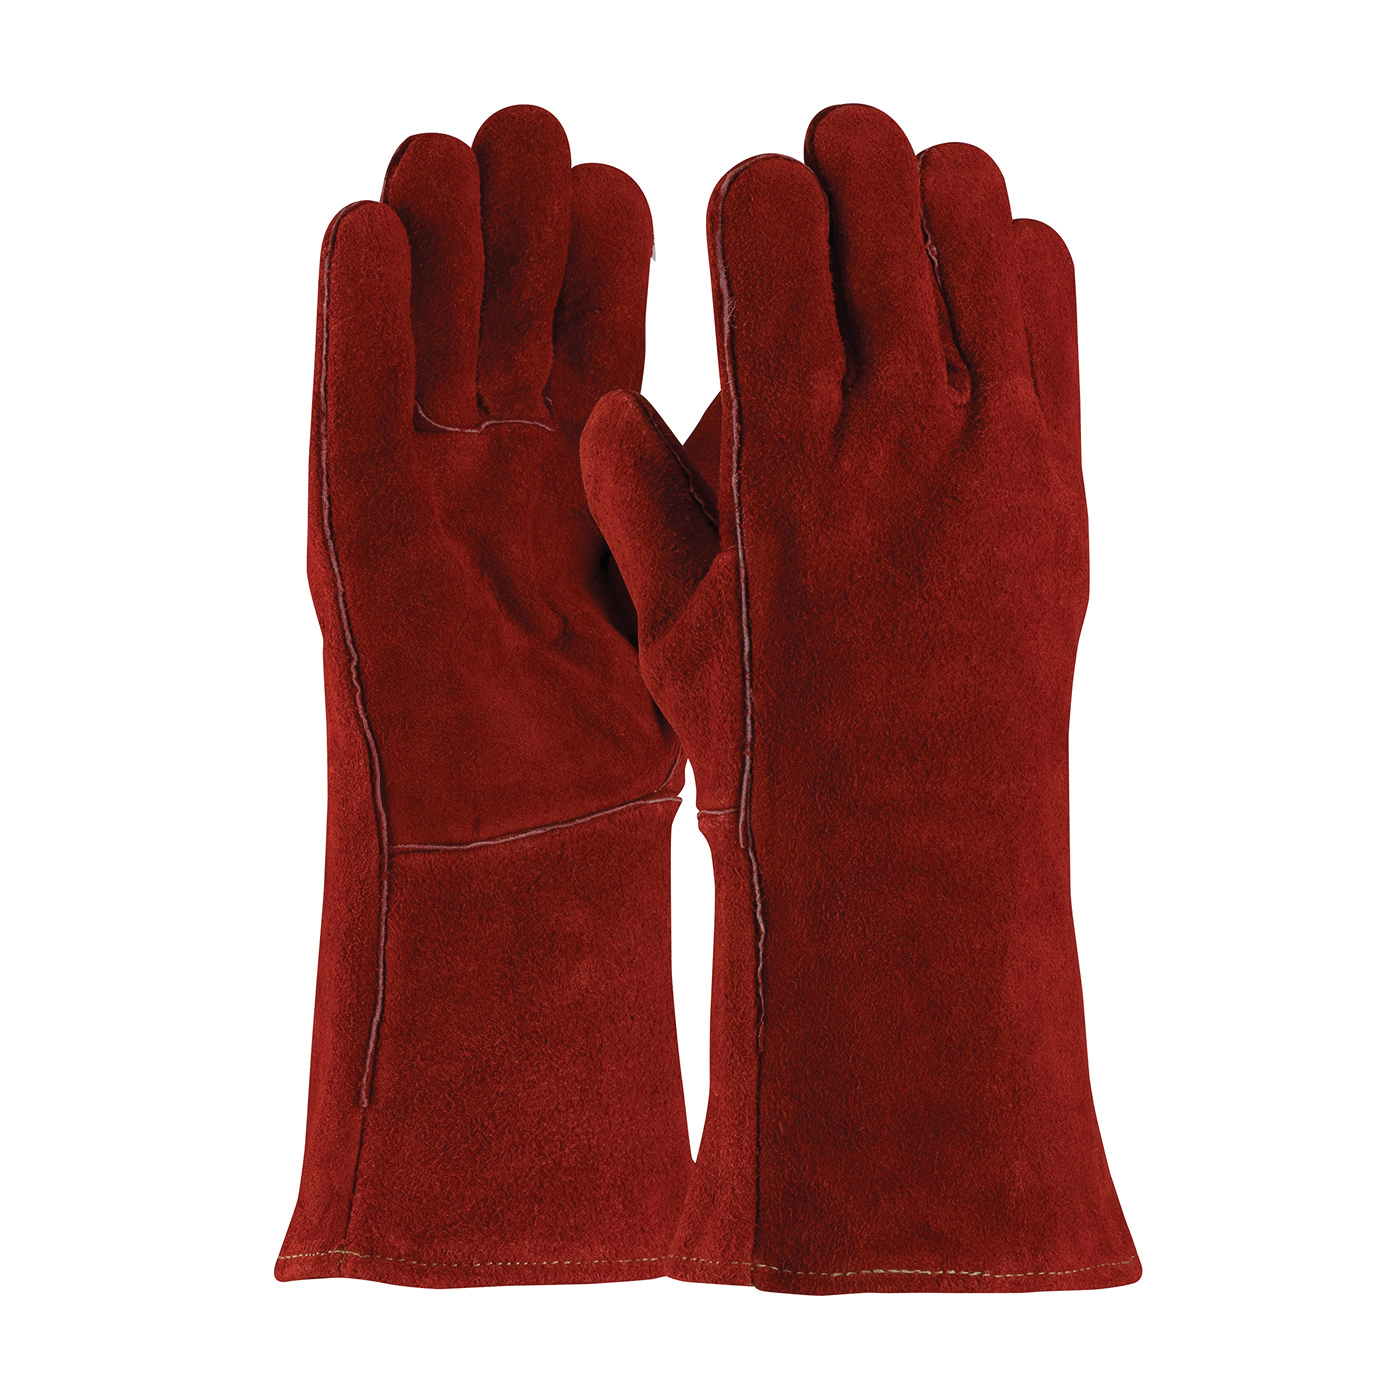 PIP® Red Viper™ 73-7015A Welding Gloves, L, Split Cowhide Leather, Russet, Cotton, Leather Gauntlet Cuff, 13-1/2 in L, 1.2 mm Glove Material Thickness